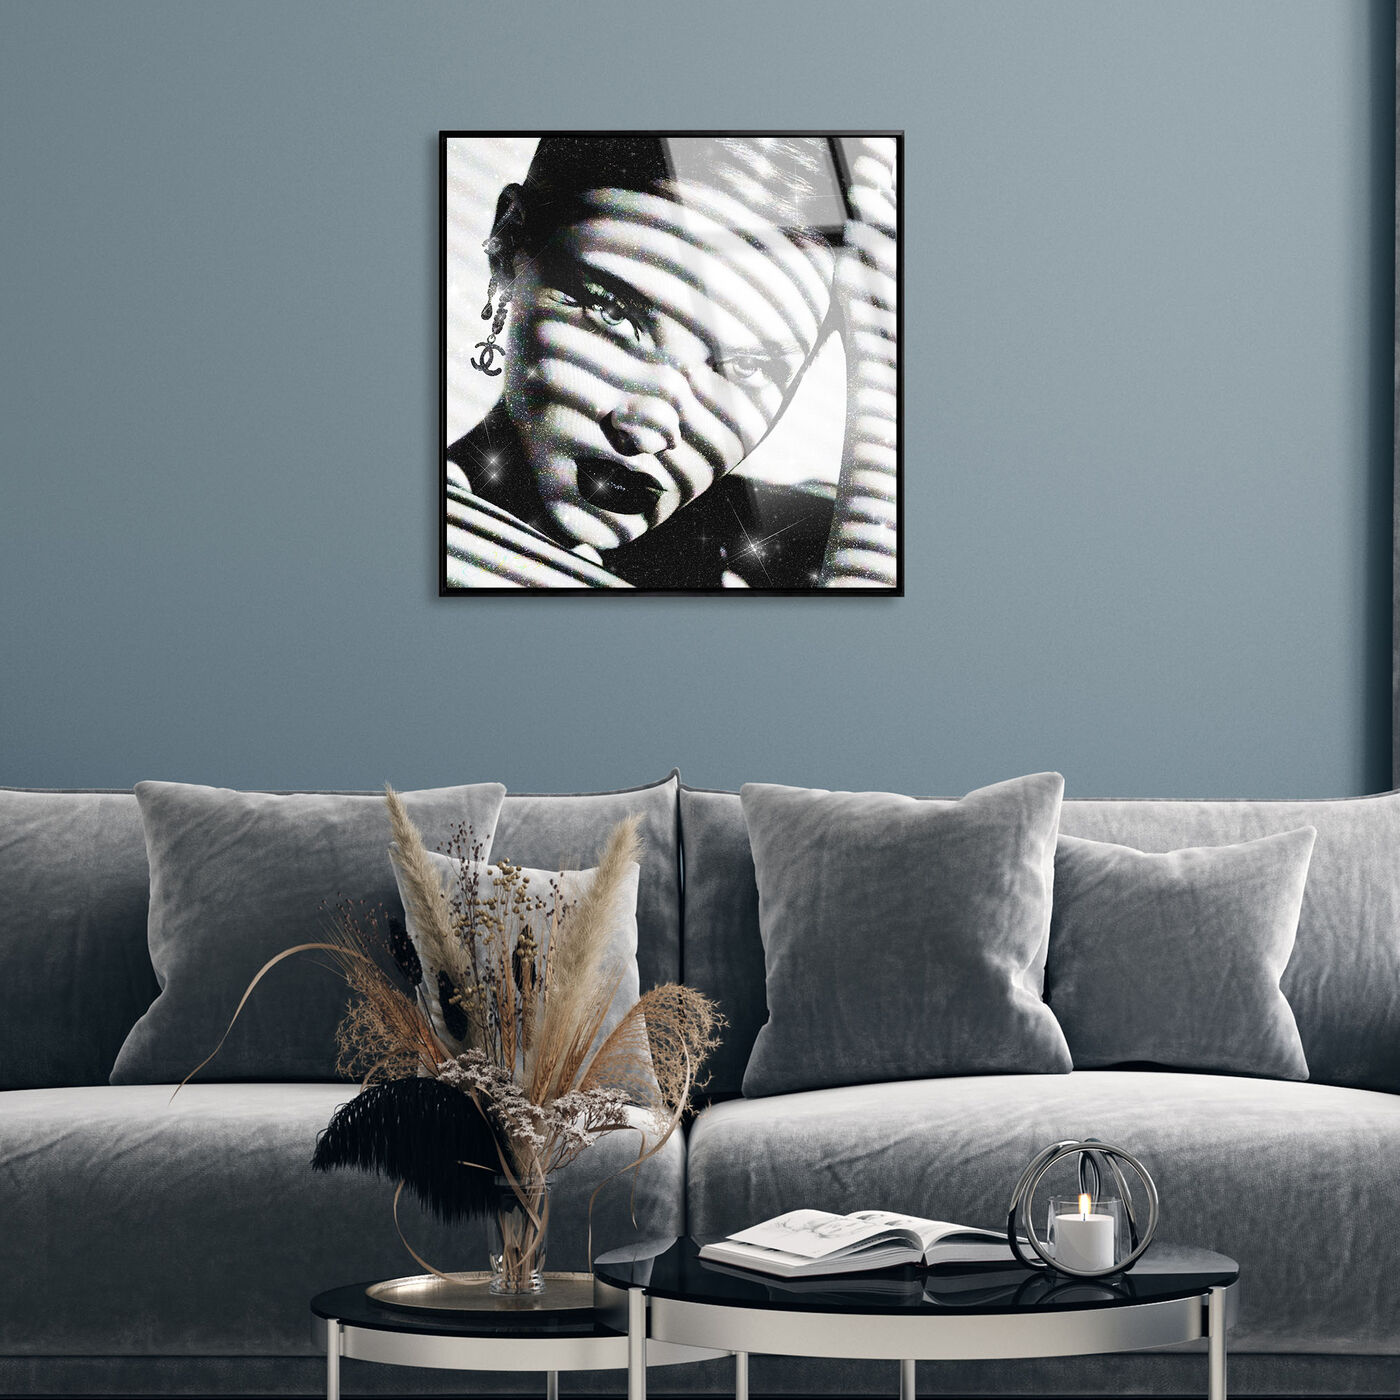 Solid Stare - Framed Acrylic Art